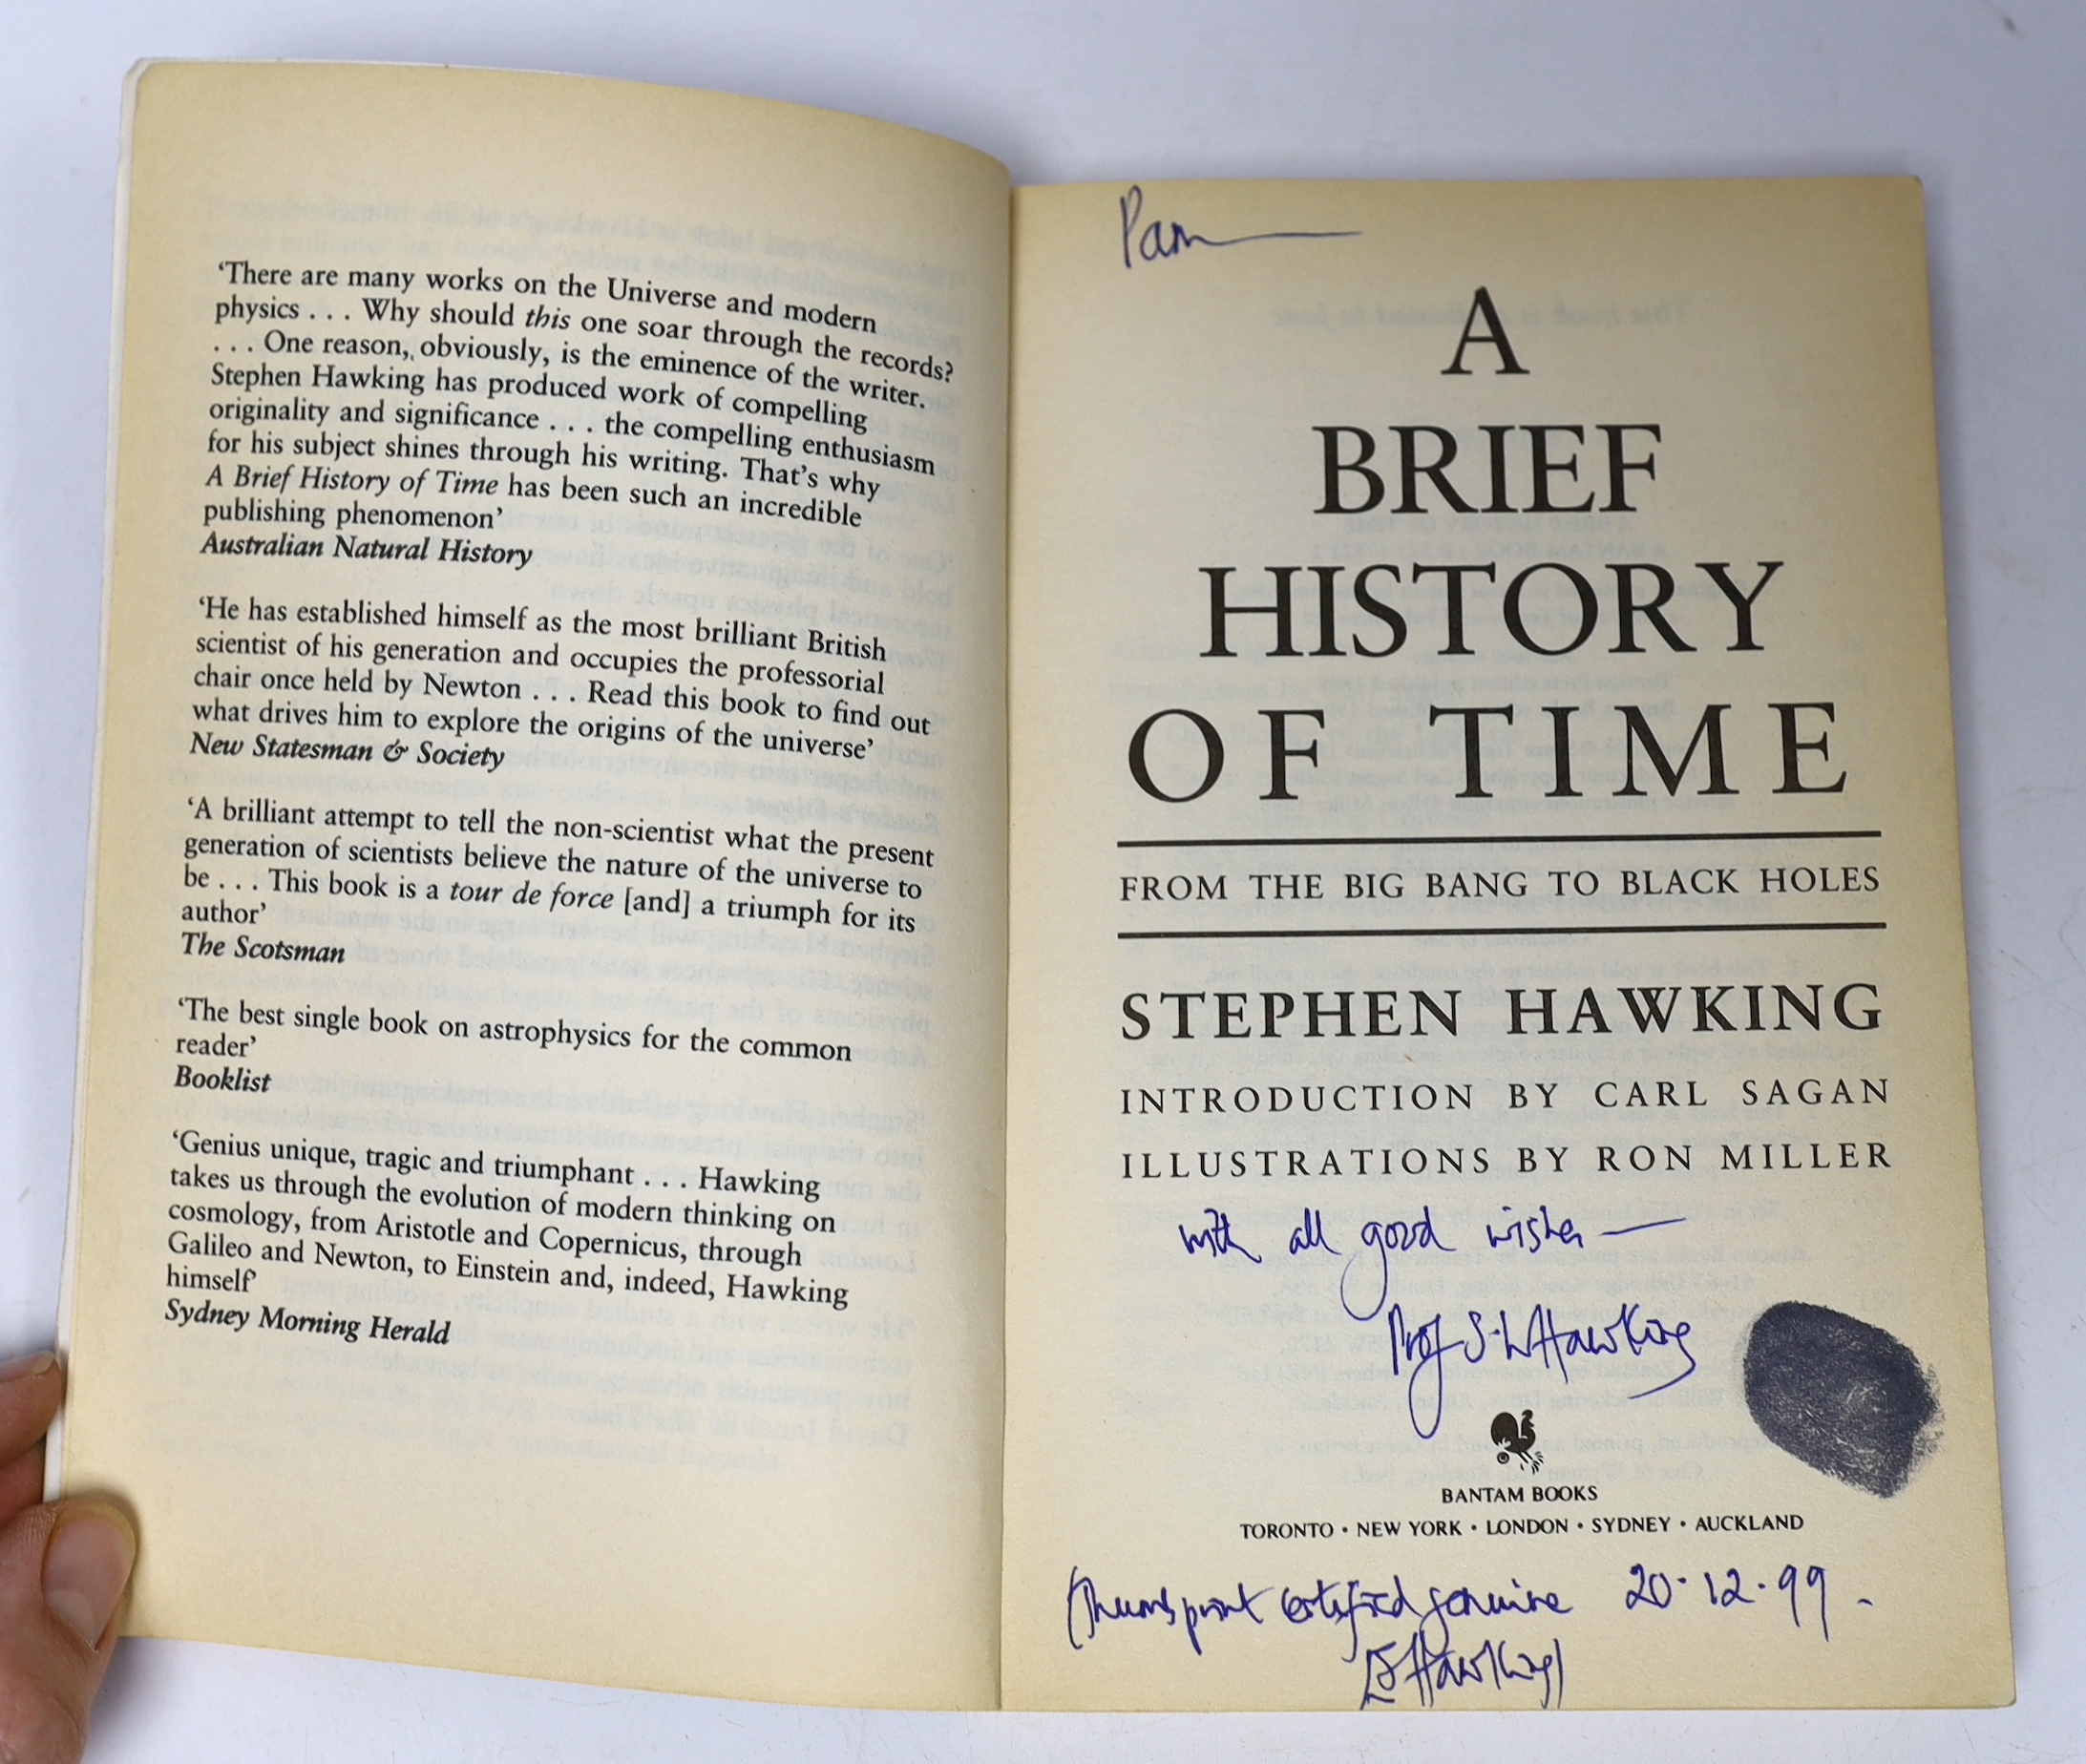 Stephen Hawking; A Brief History of Time, Bantam Books paperback edition, 1995, signed by Stephen Hawking with a thumb print